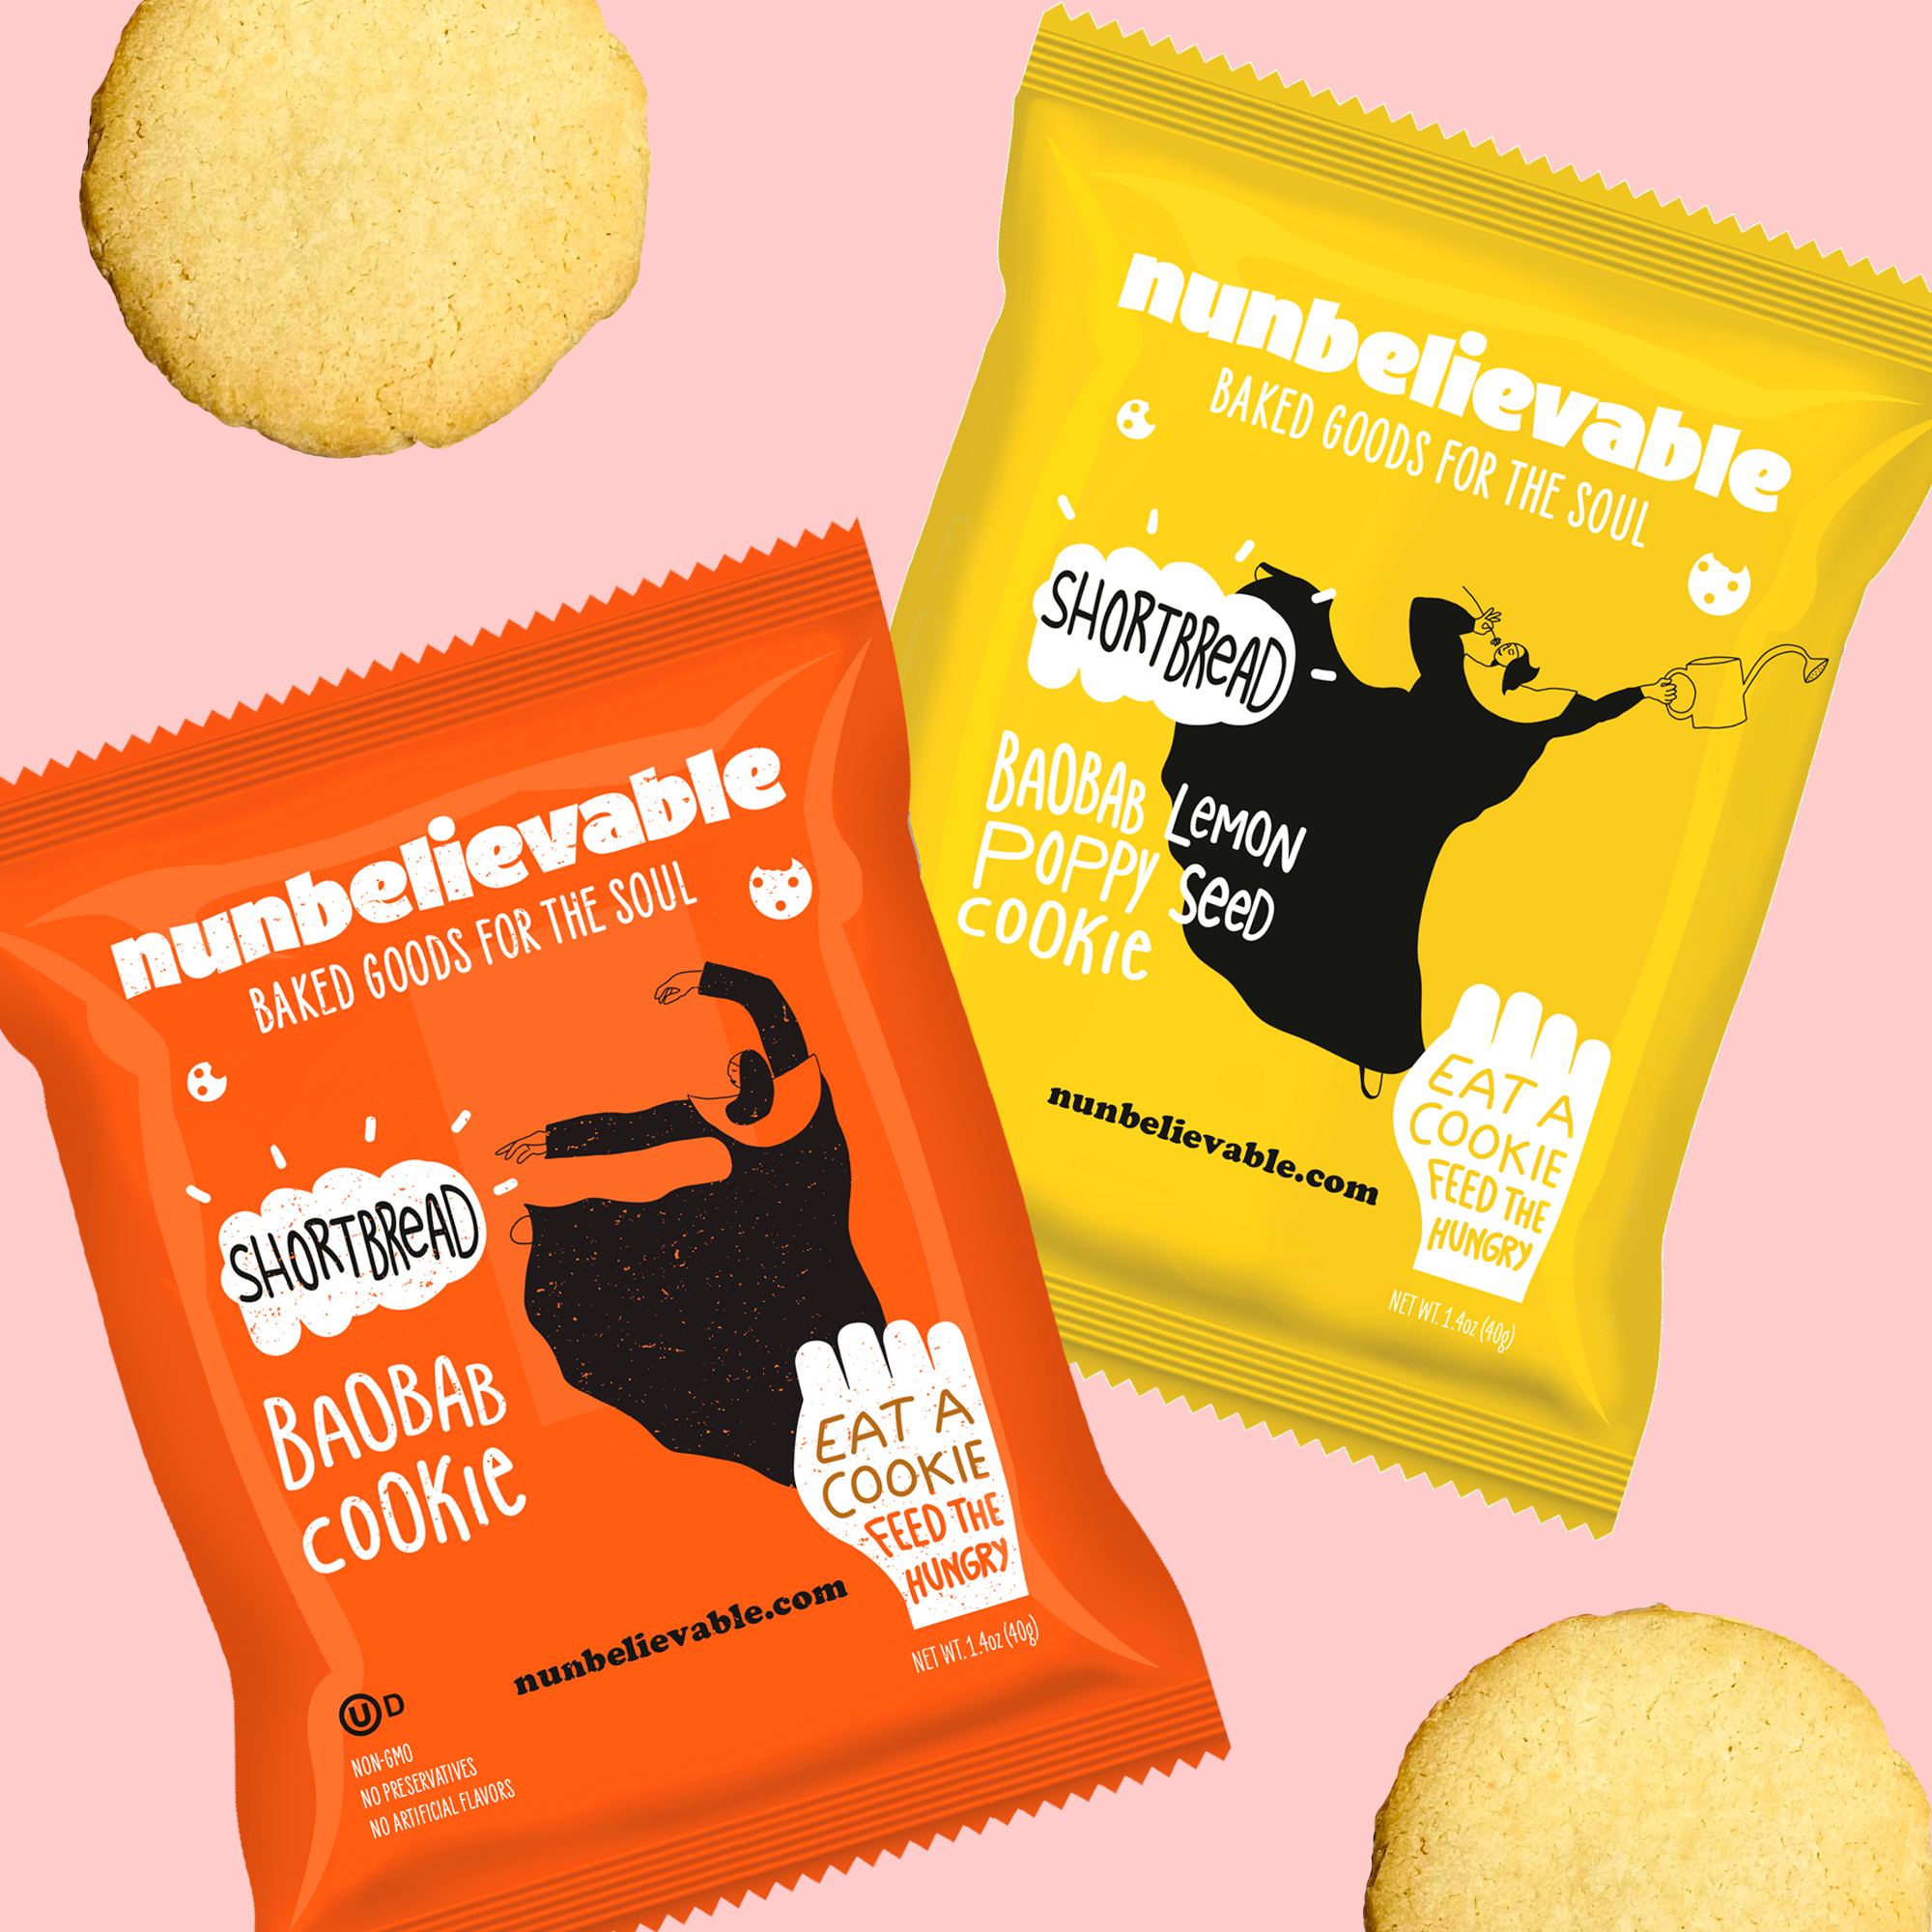 Introducing Our Delicious New Shortbread Cookies, Powered with the Superfood Baobab